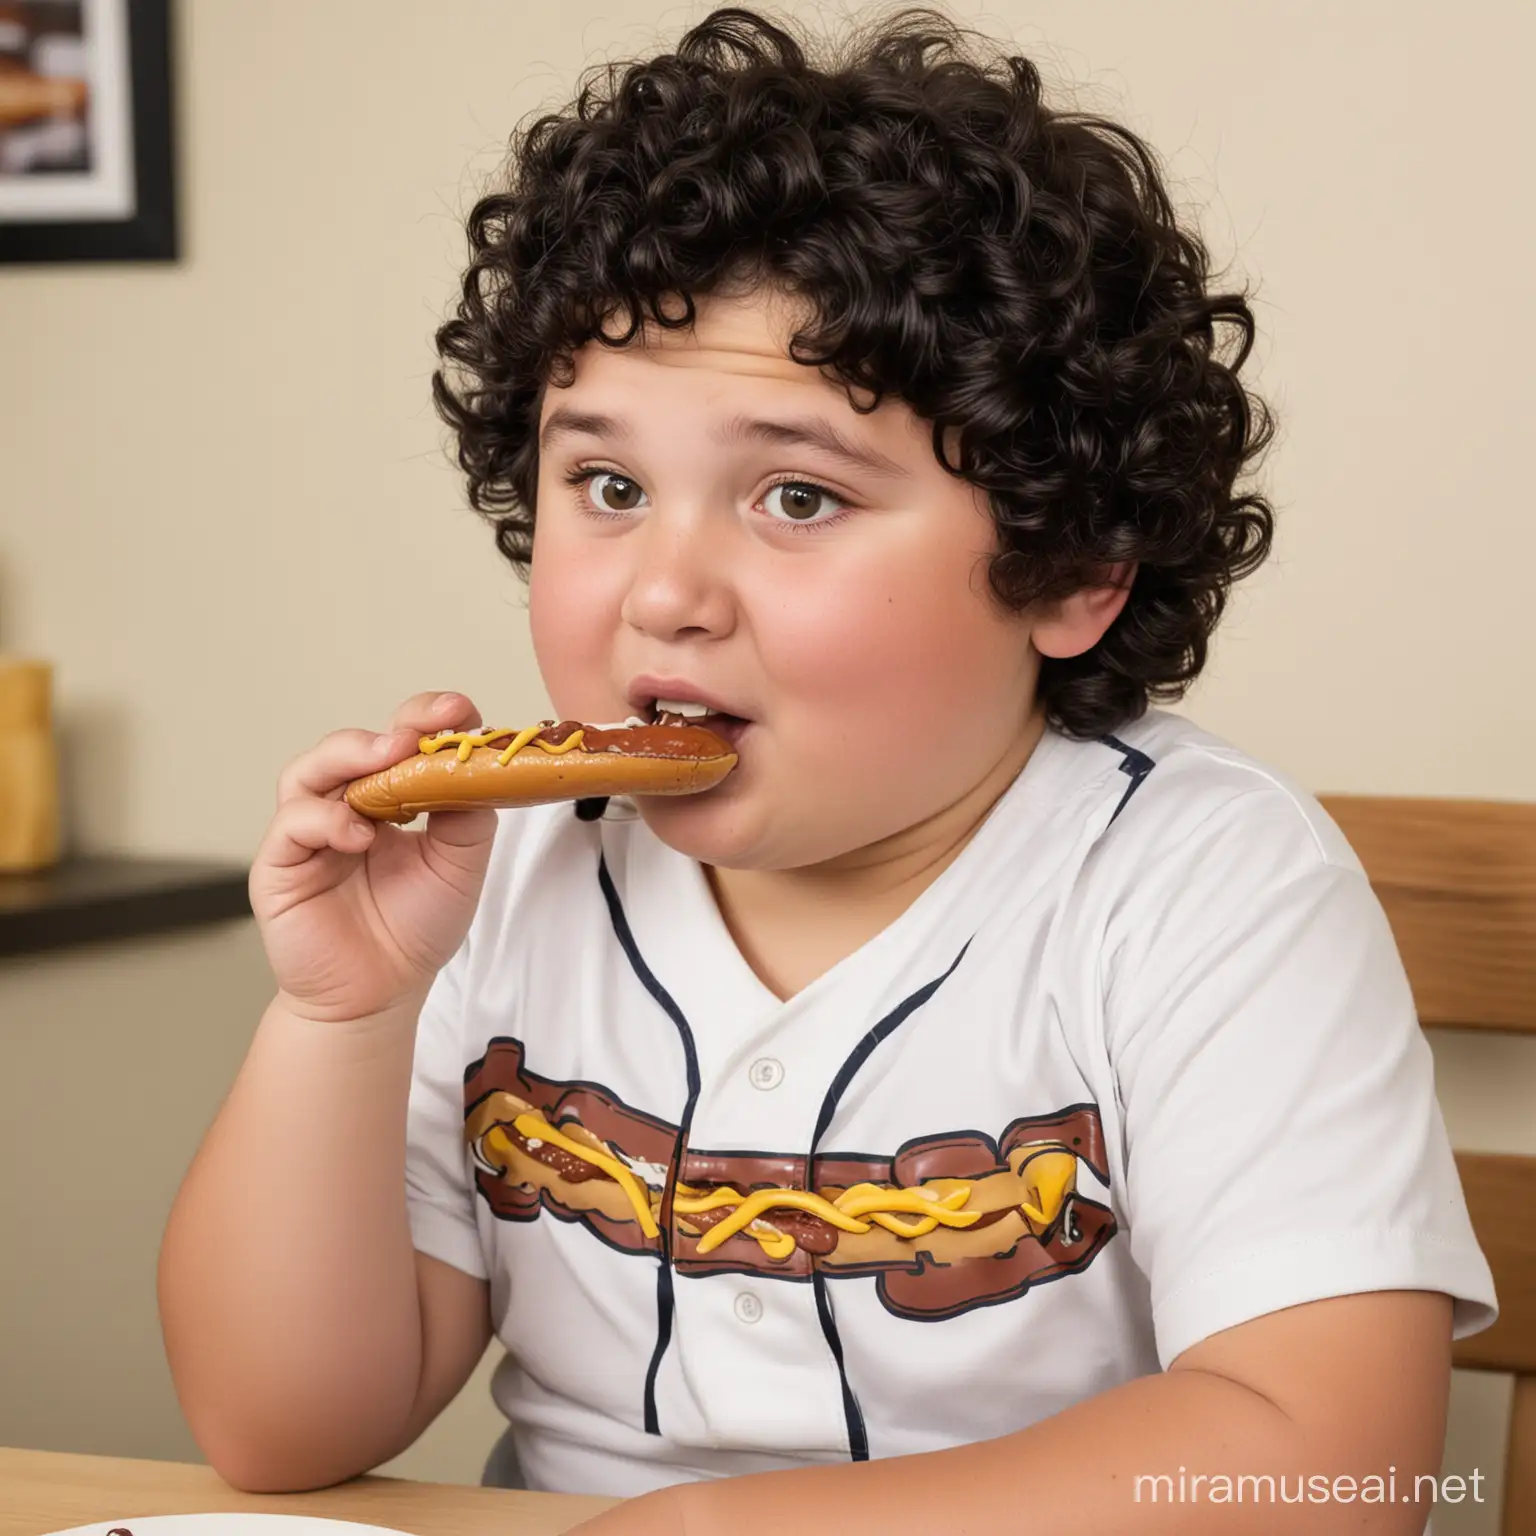 fat baseball kid with black curly hair eating weiners 